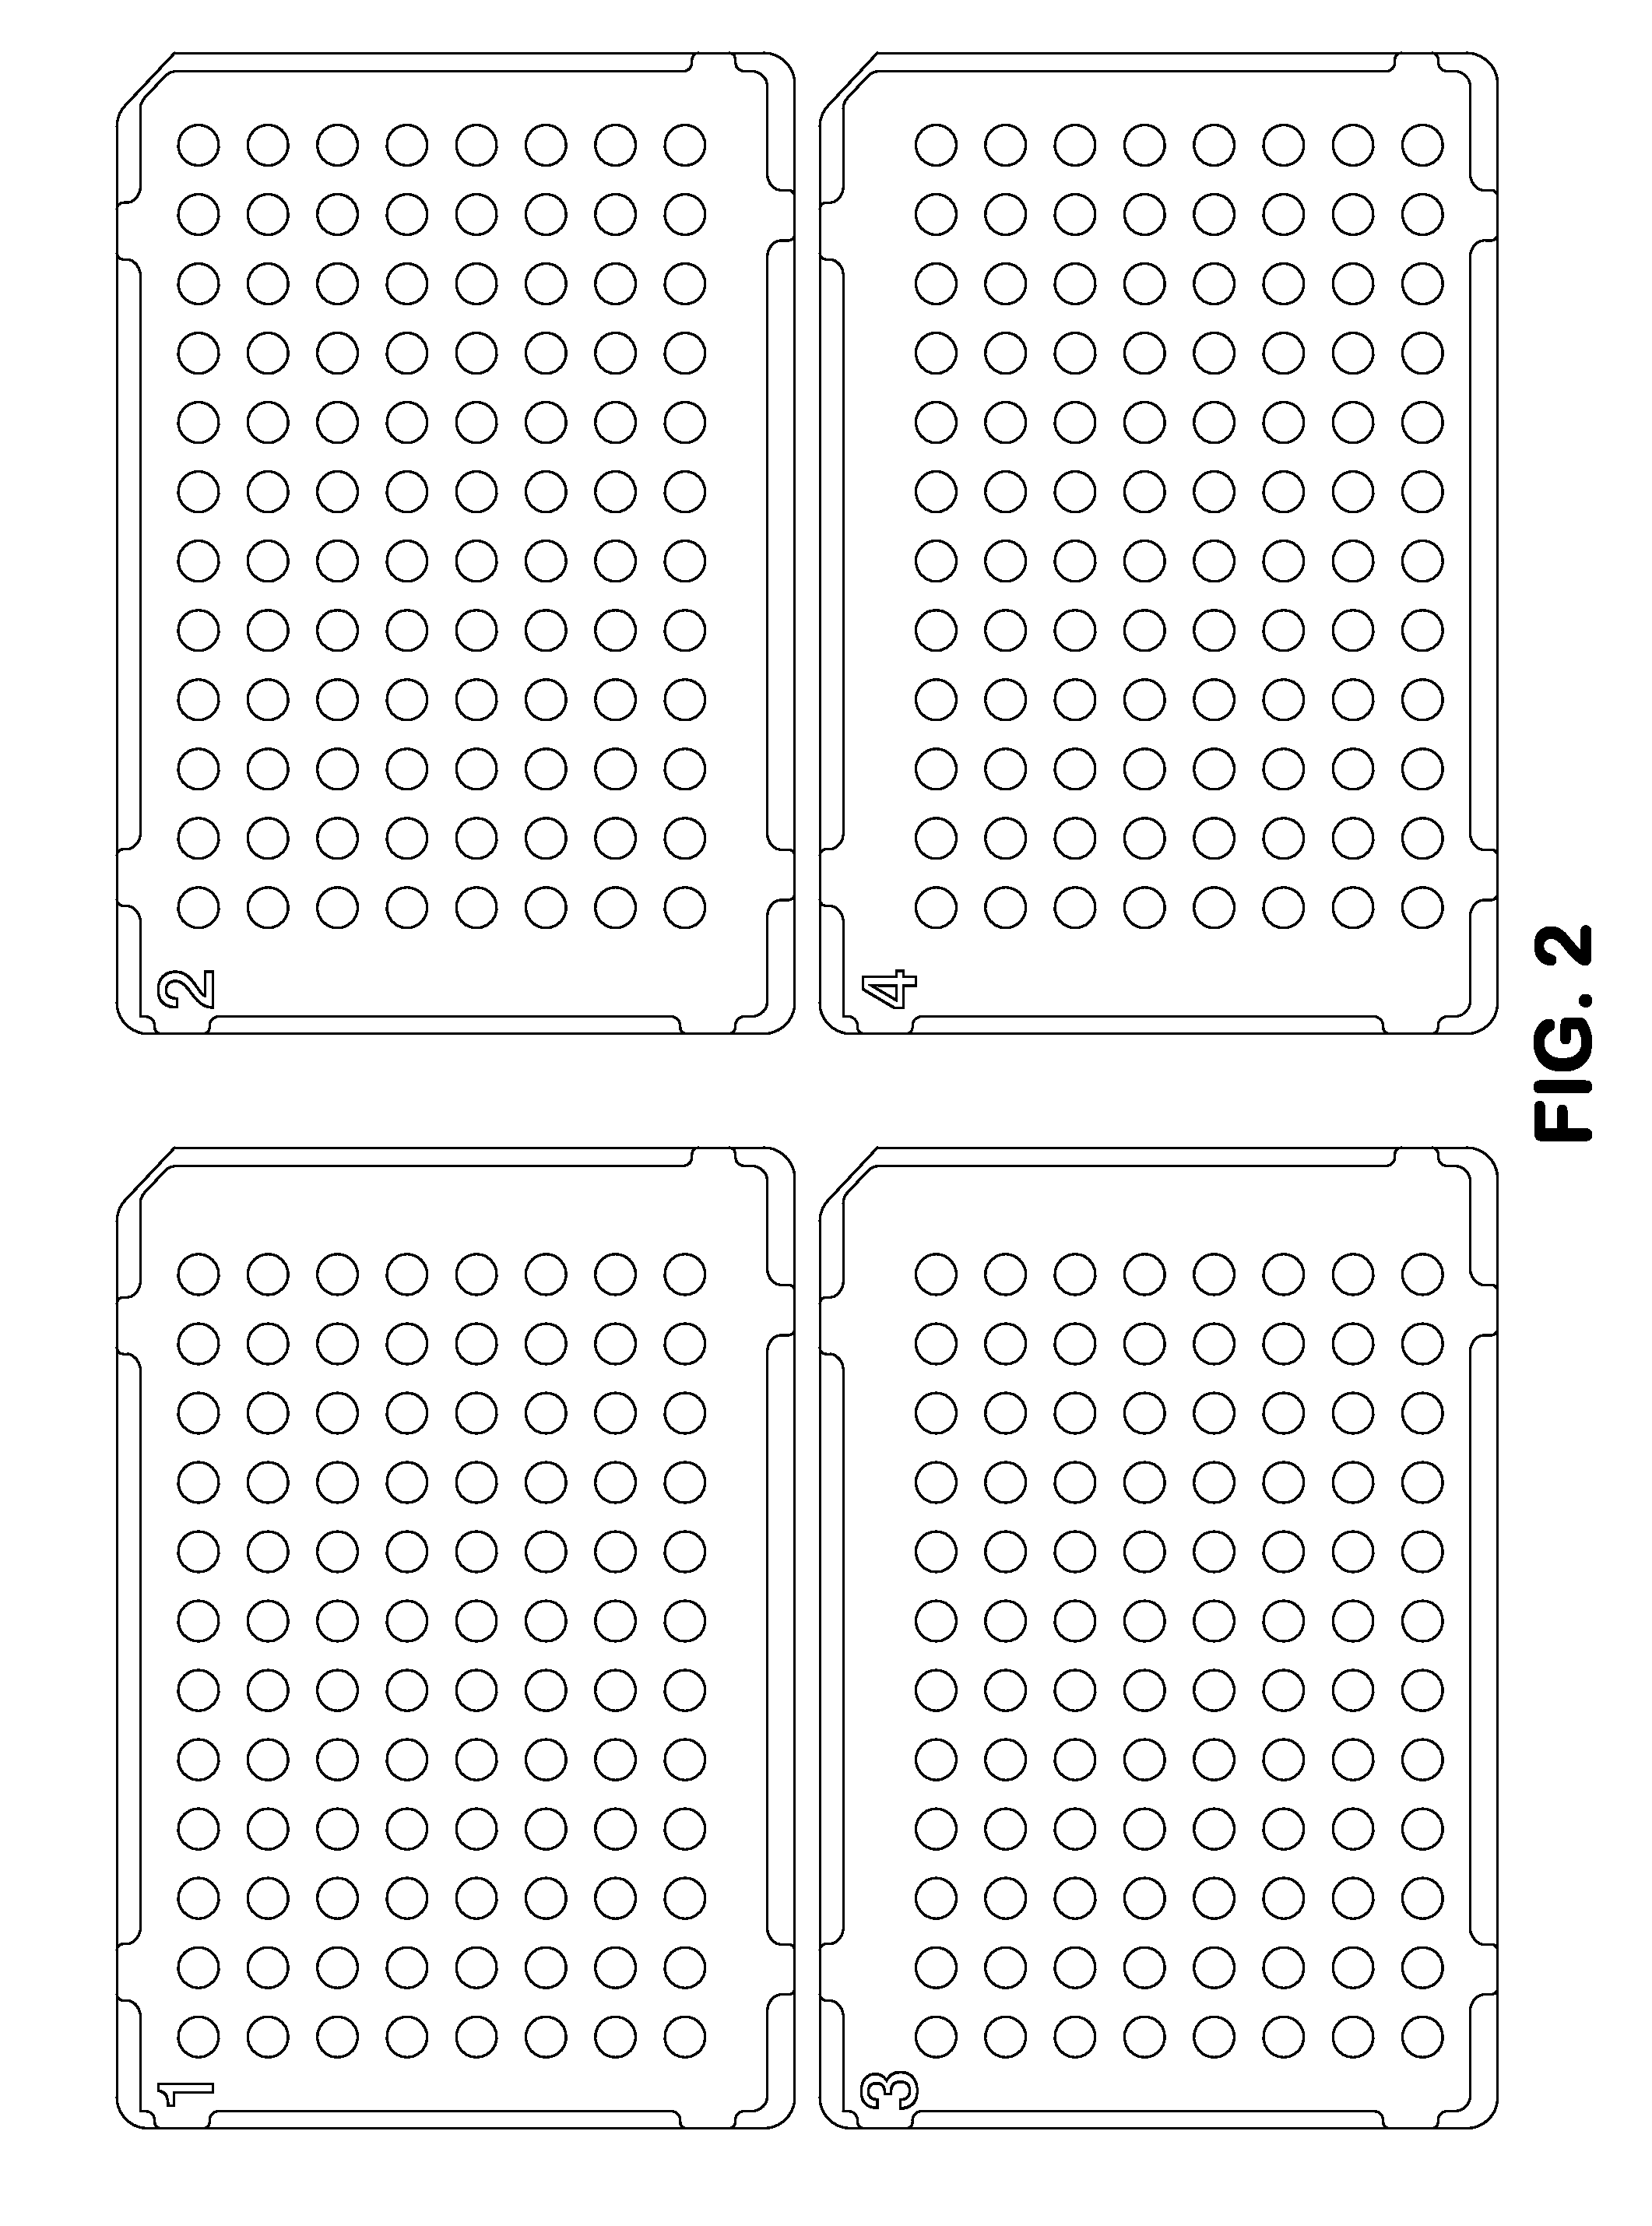 Microtiter plate mask and methods for its use